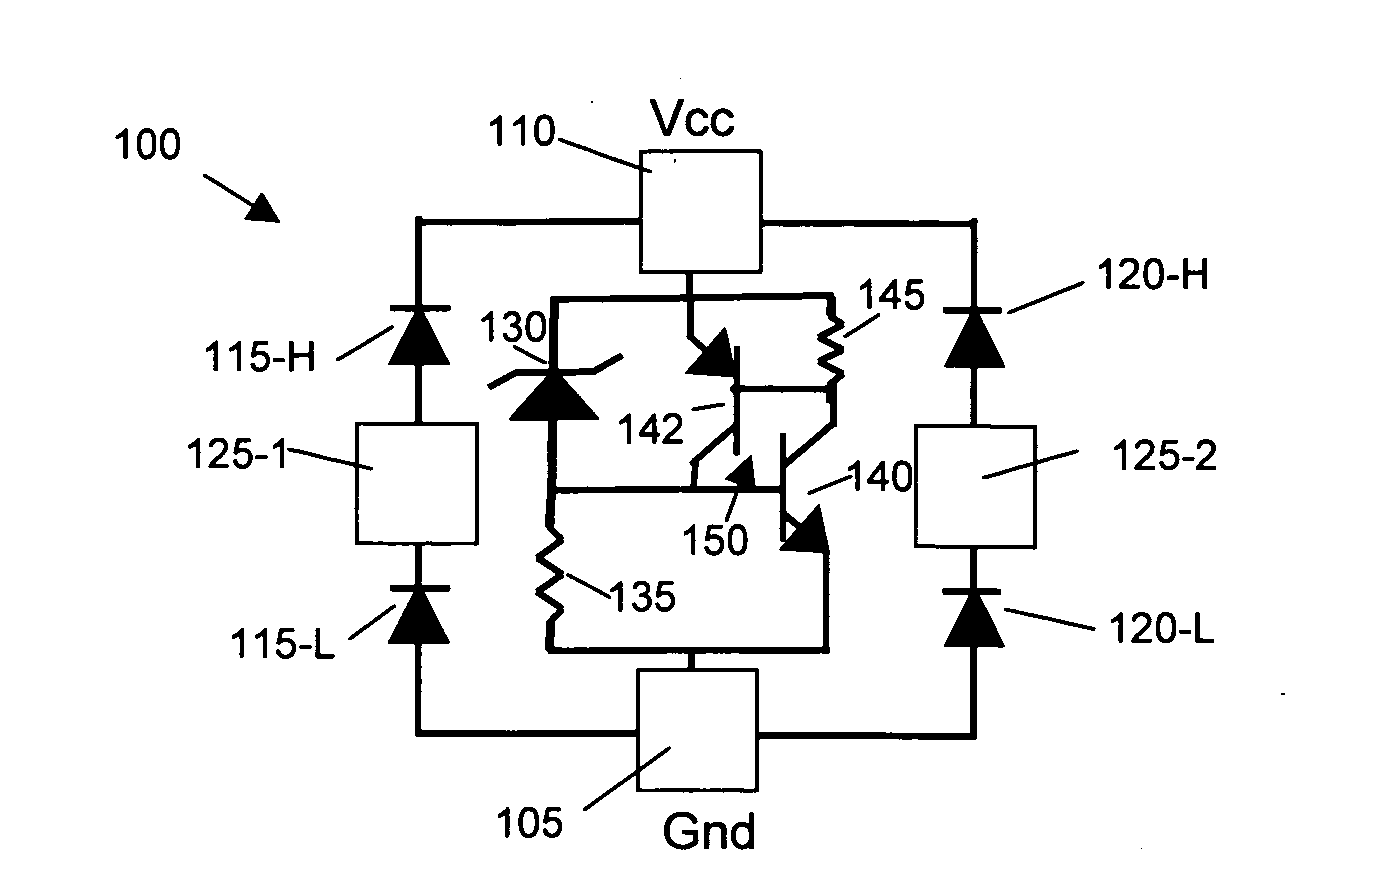 Circuit configurations to reduce snapback of a transient voltage suppressor